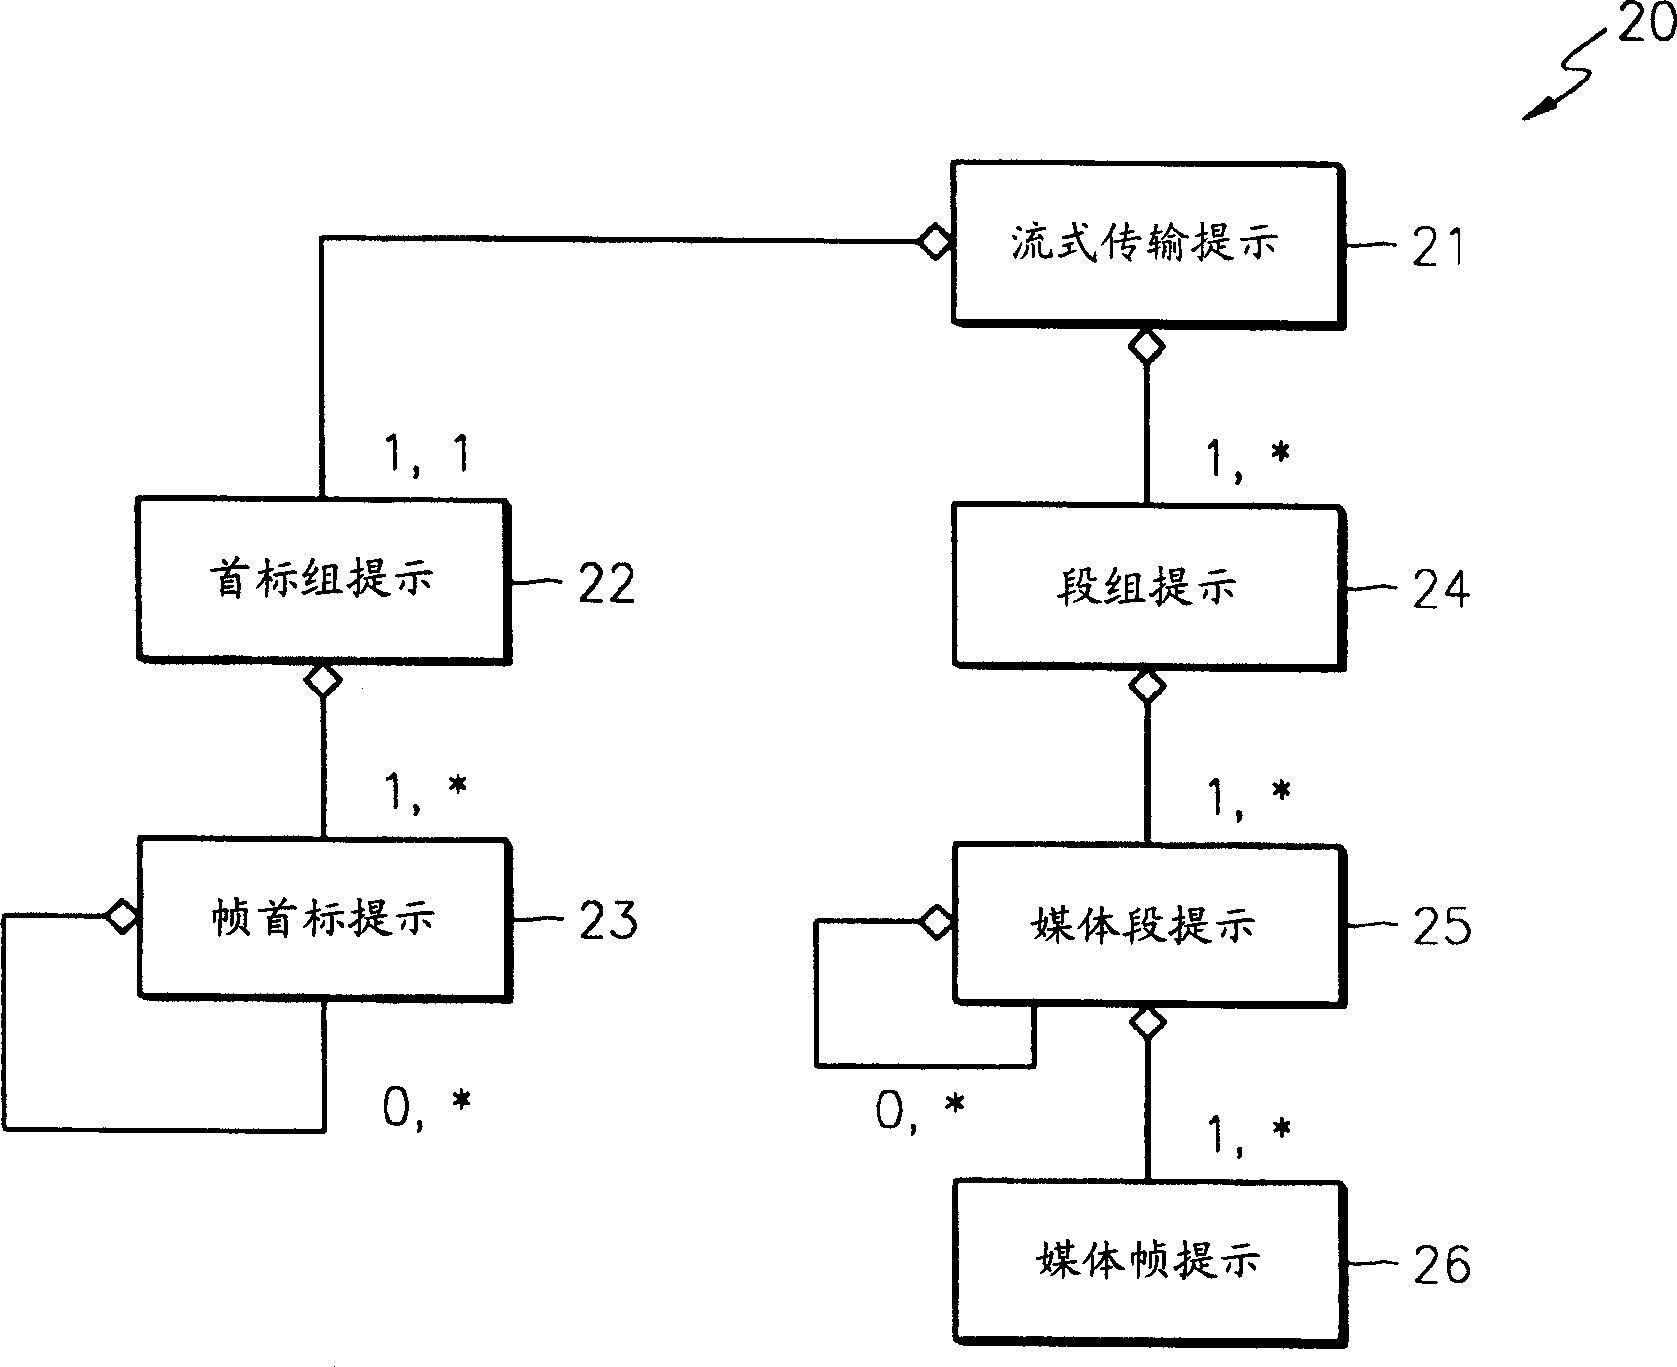 Apparatus and method for stream-oriented multimedia data transmission